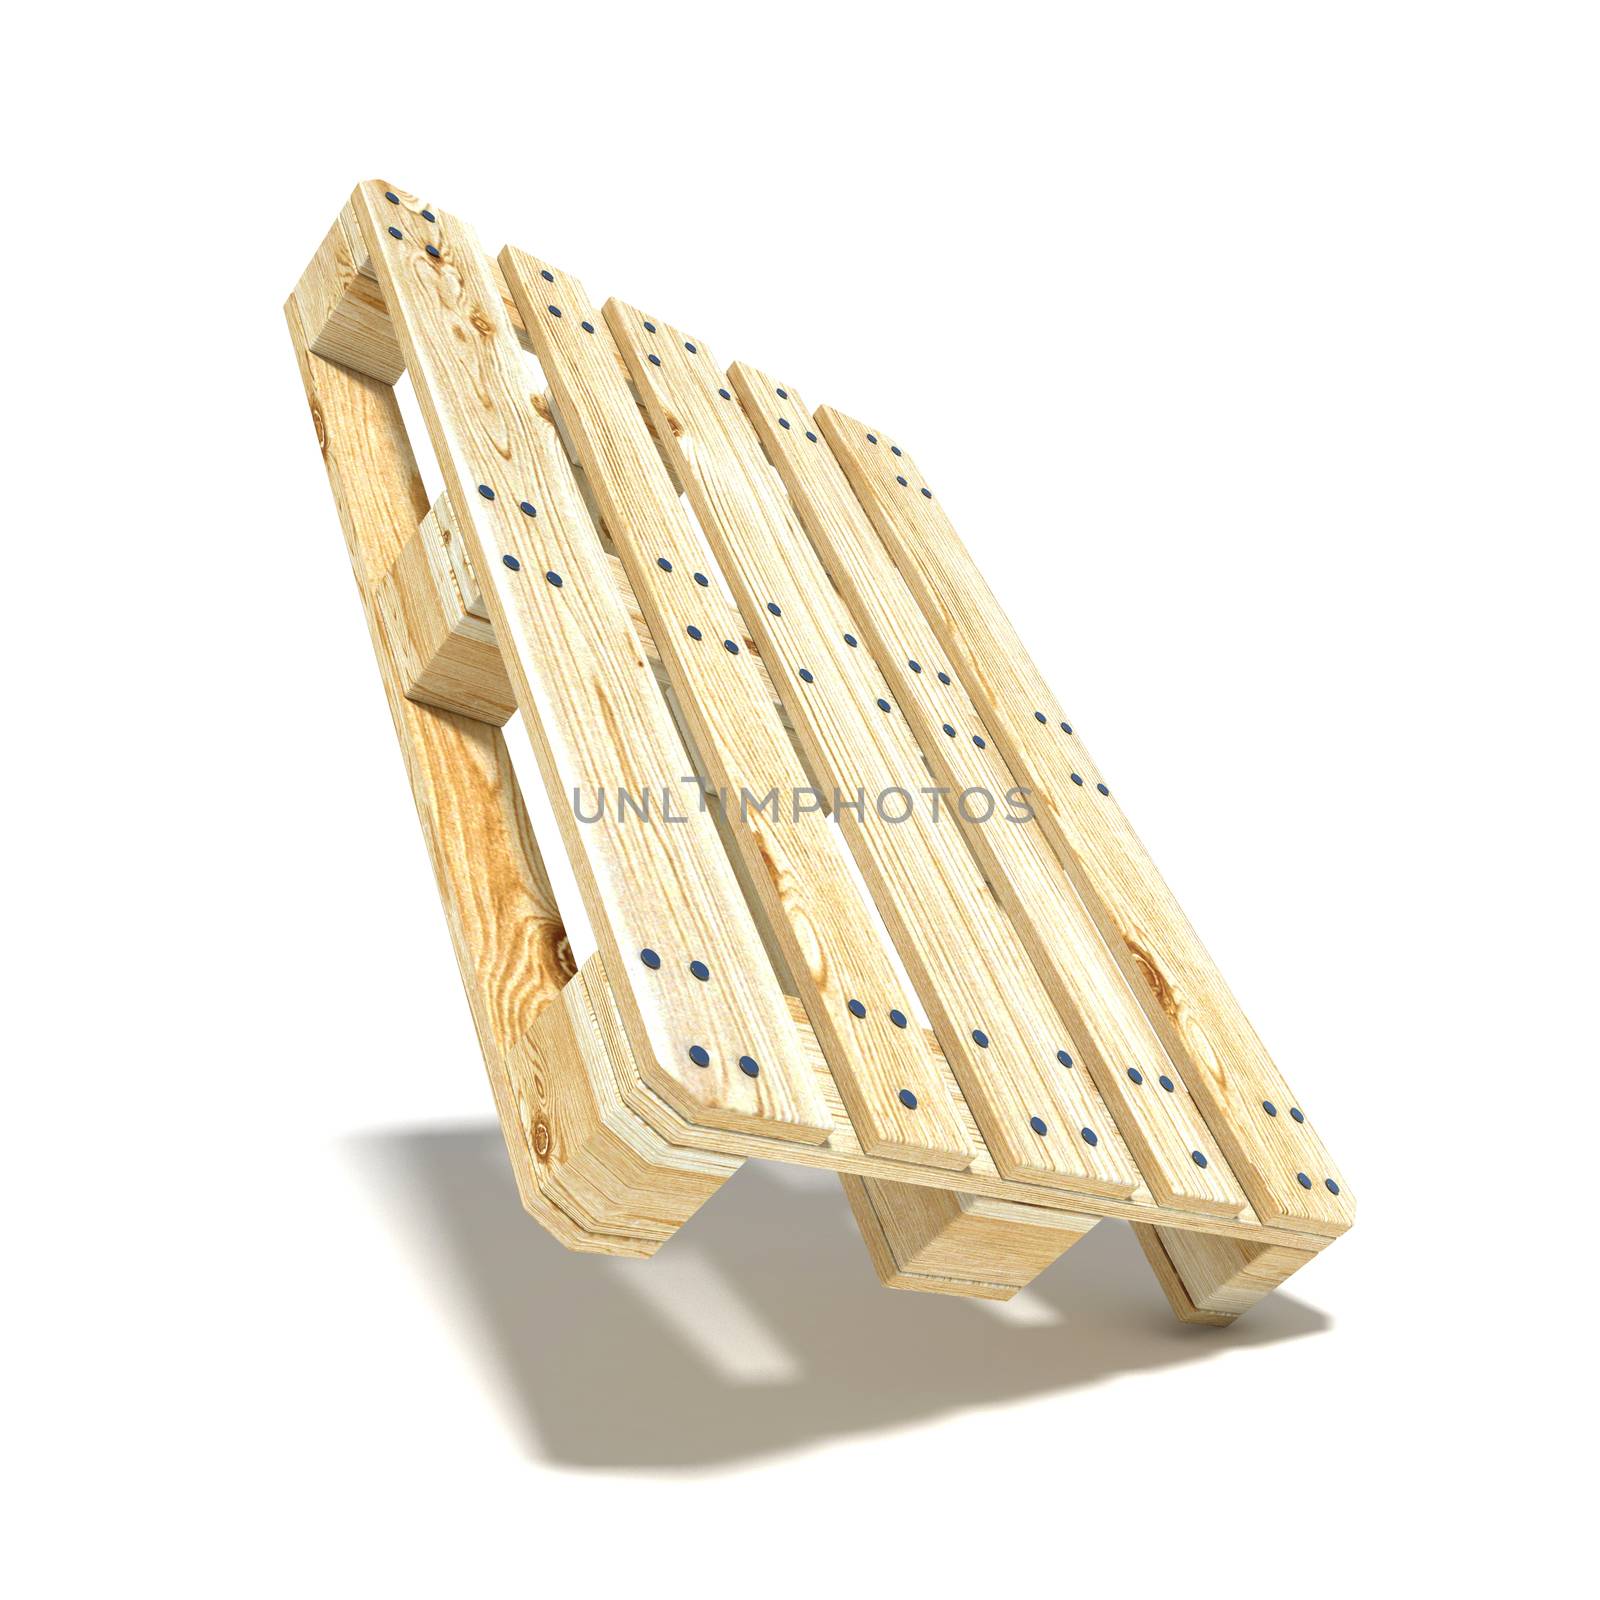 Euro pallet. Angled view. 3D render illustration isolated on white background